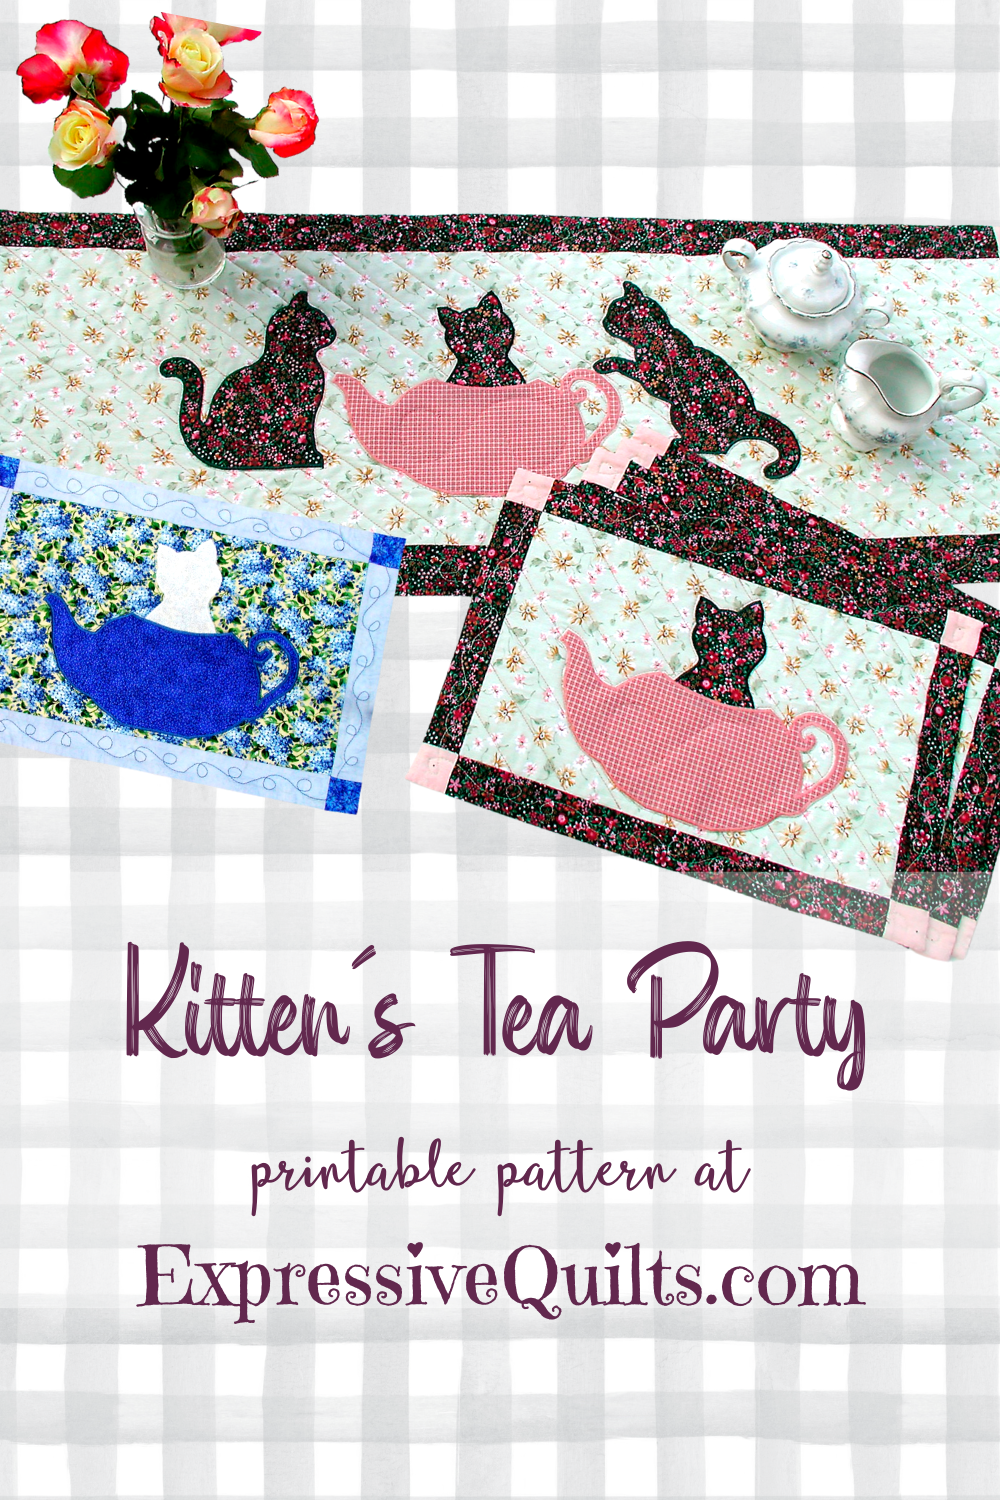 Easy Fusible Digital Download Quilt Pattern for Kittens Tea - Placemats and Table Runner